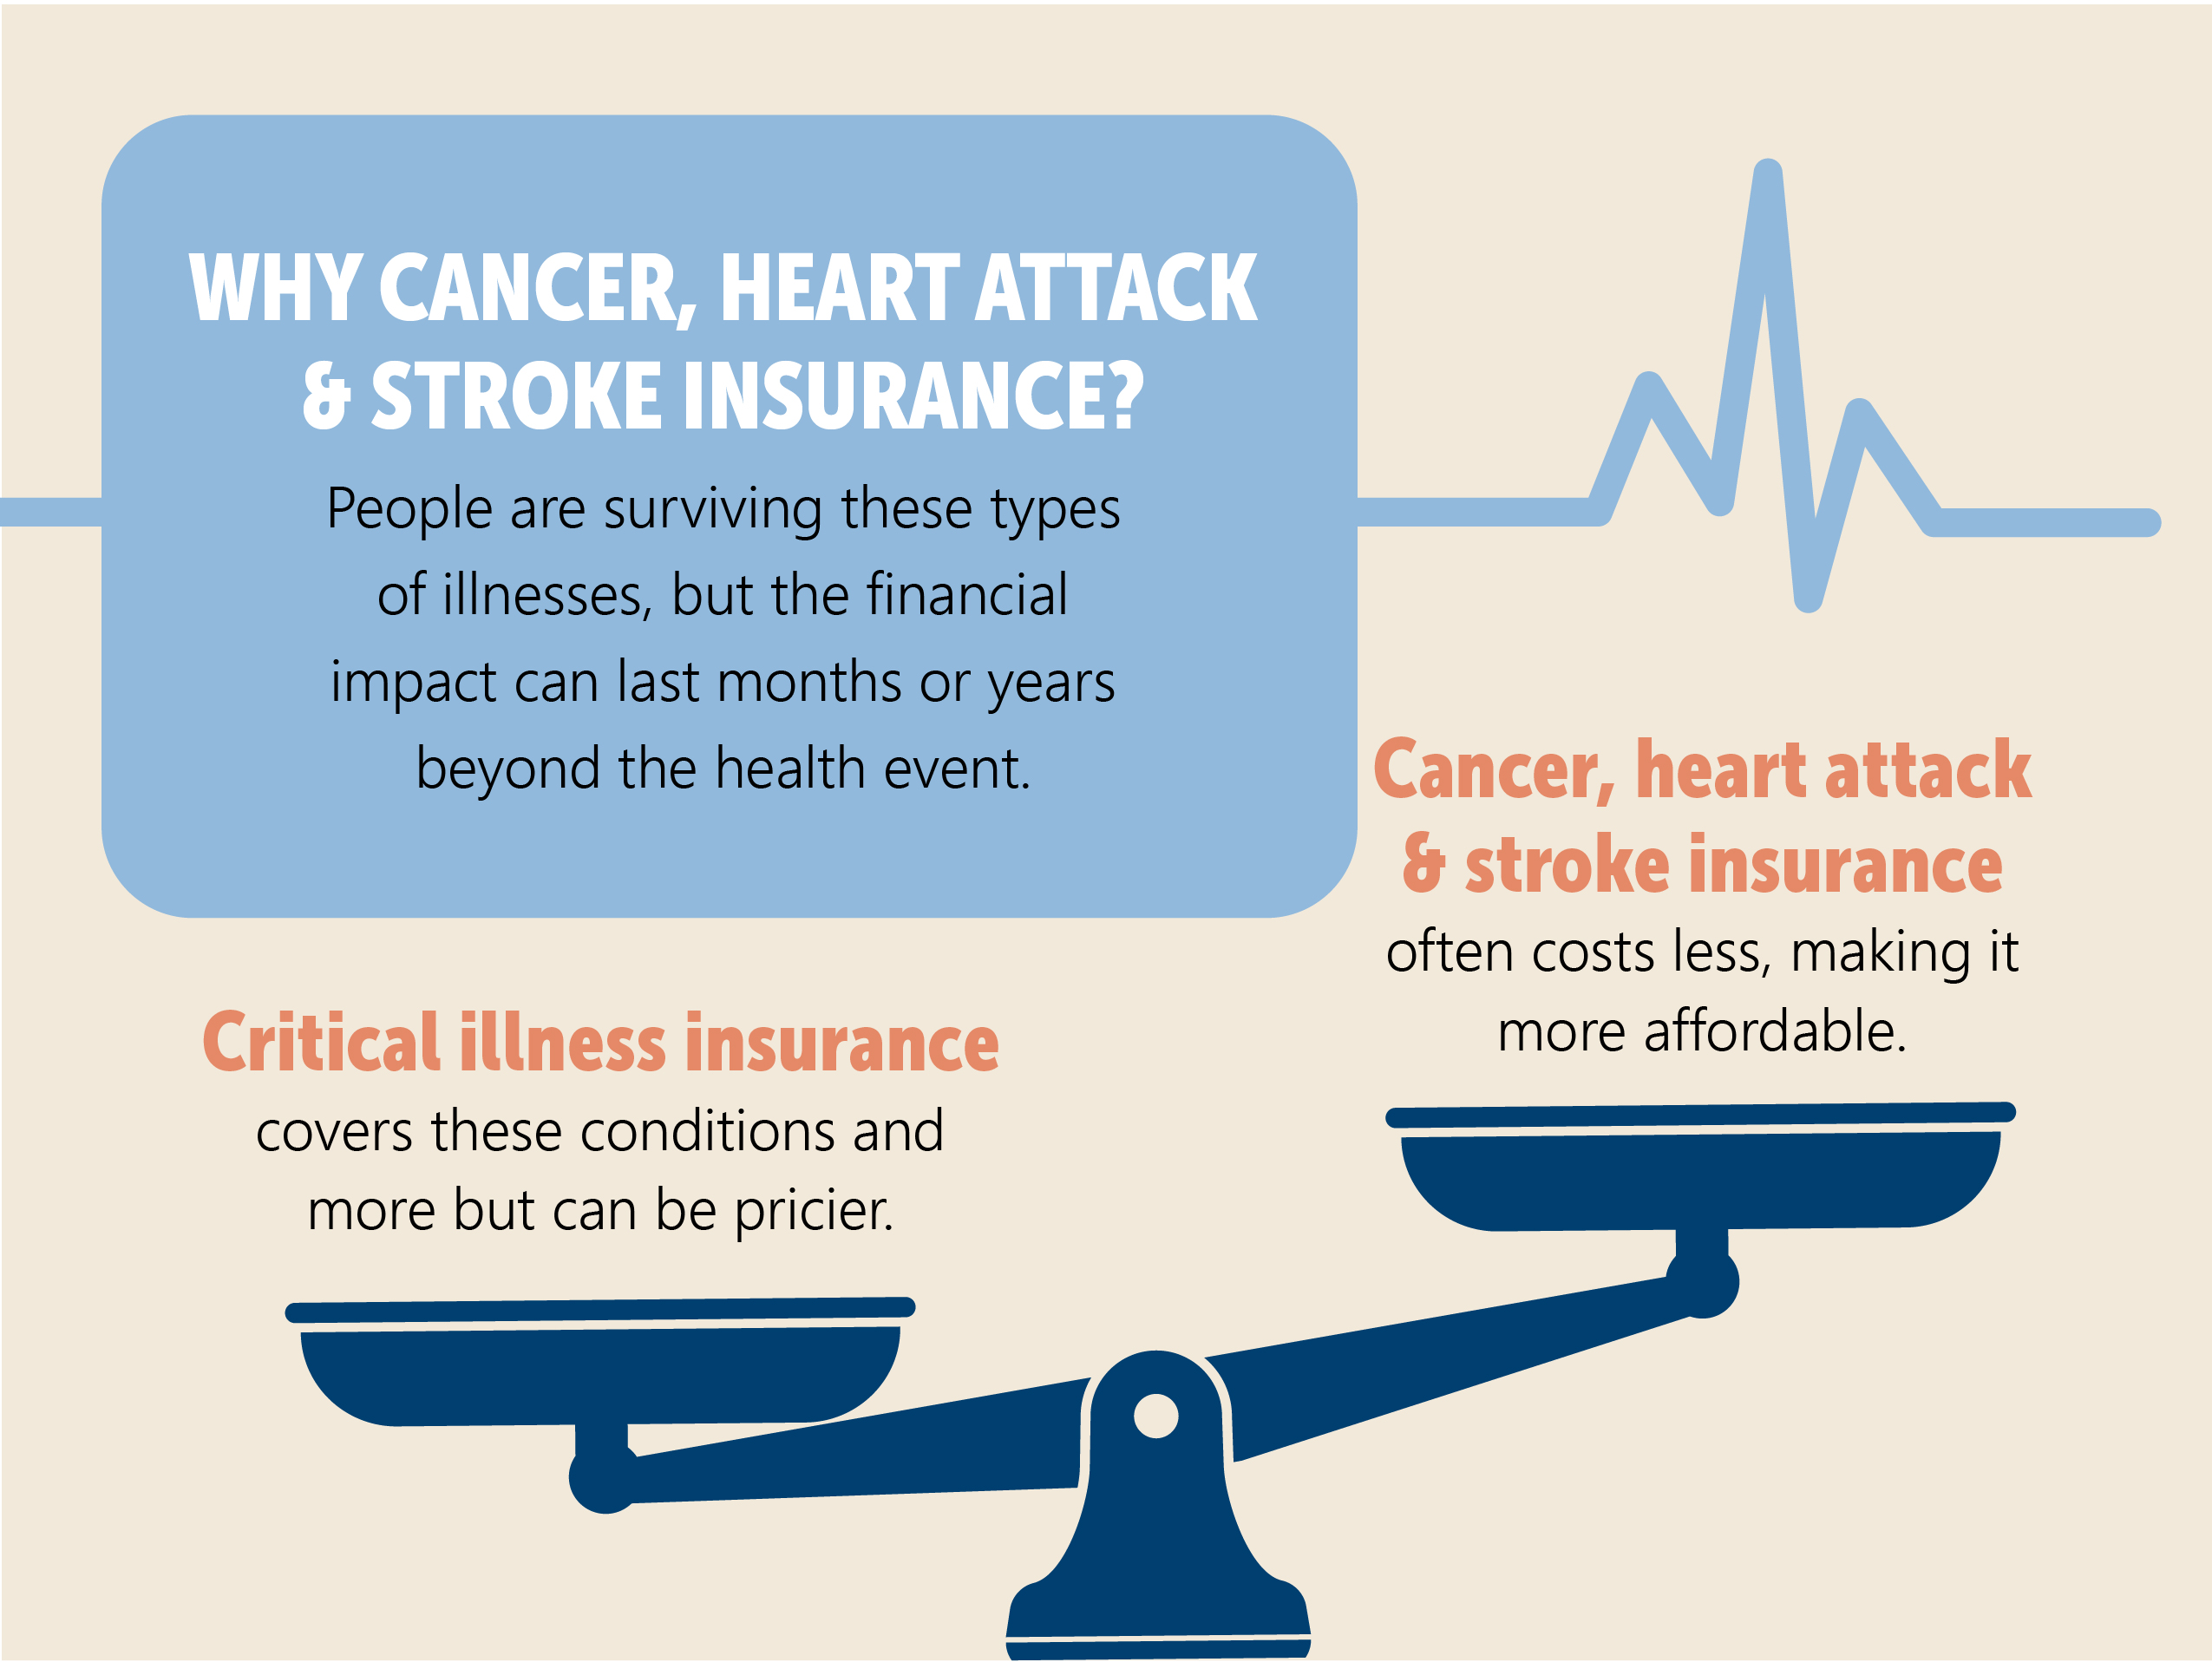 Why Sell Cancer, Heart Attack and Stroke Plans Versus Critical Illness Plans?